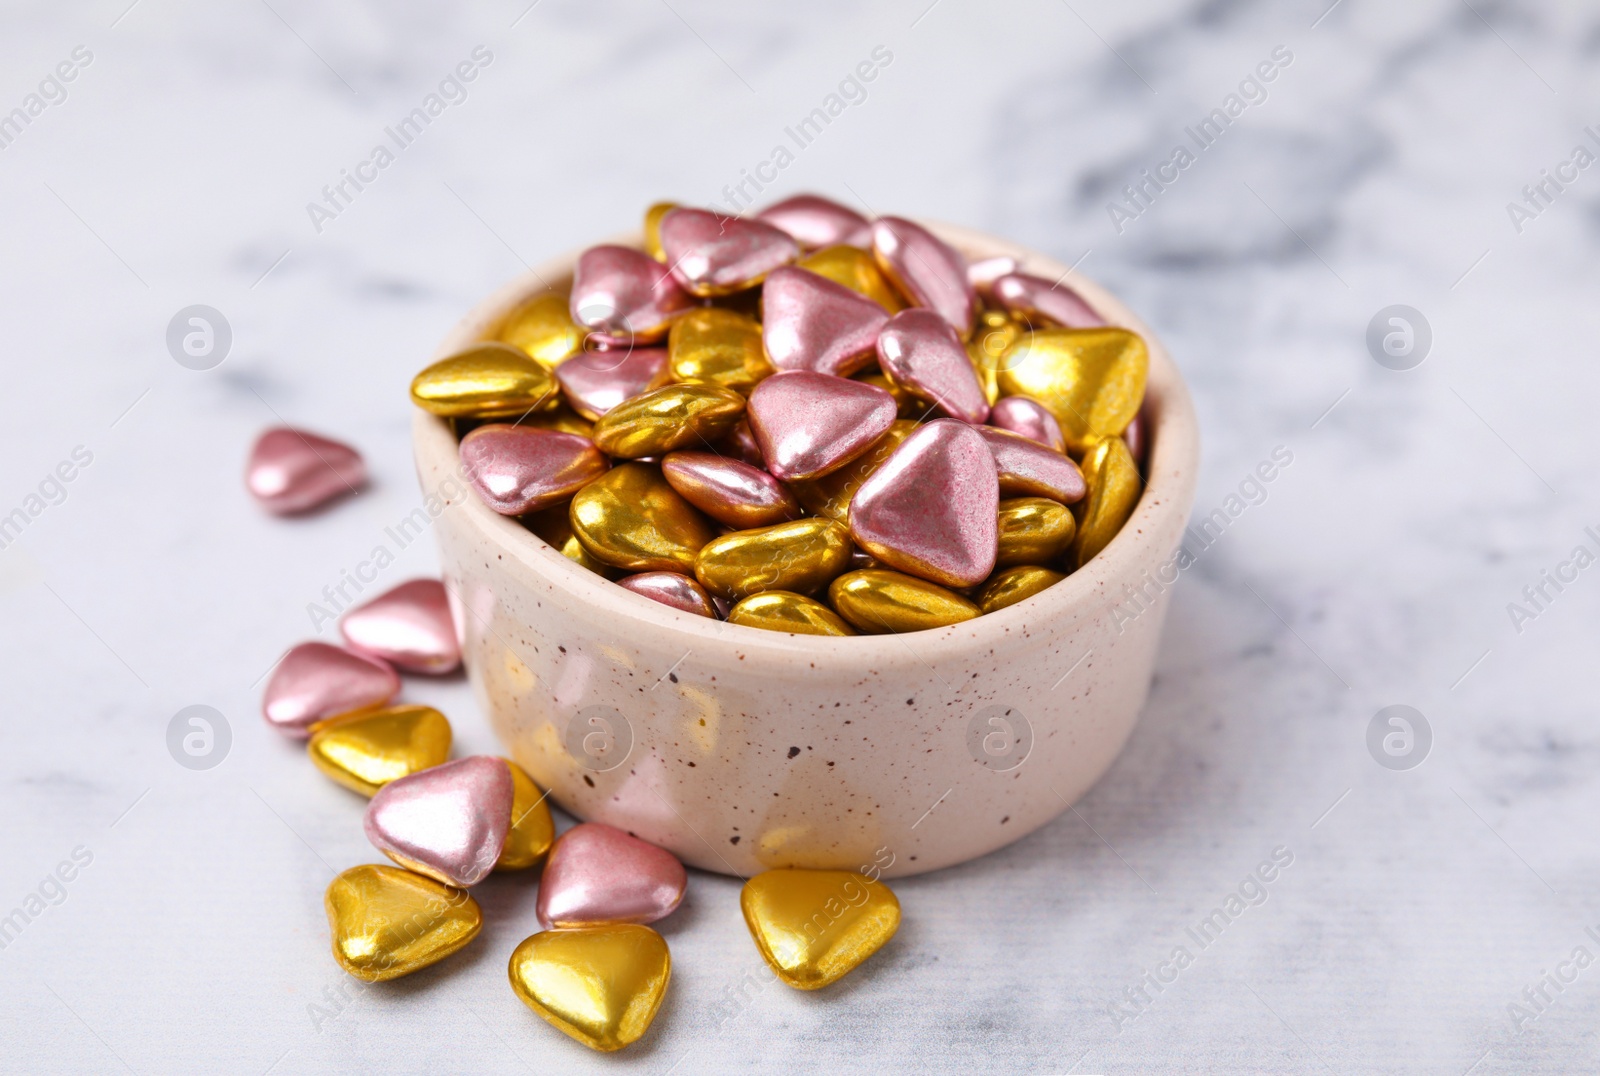 Photo of Bowl and delicious heart shaped candies on white marble table